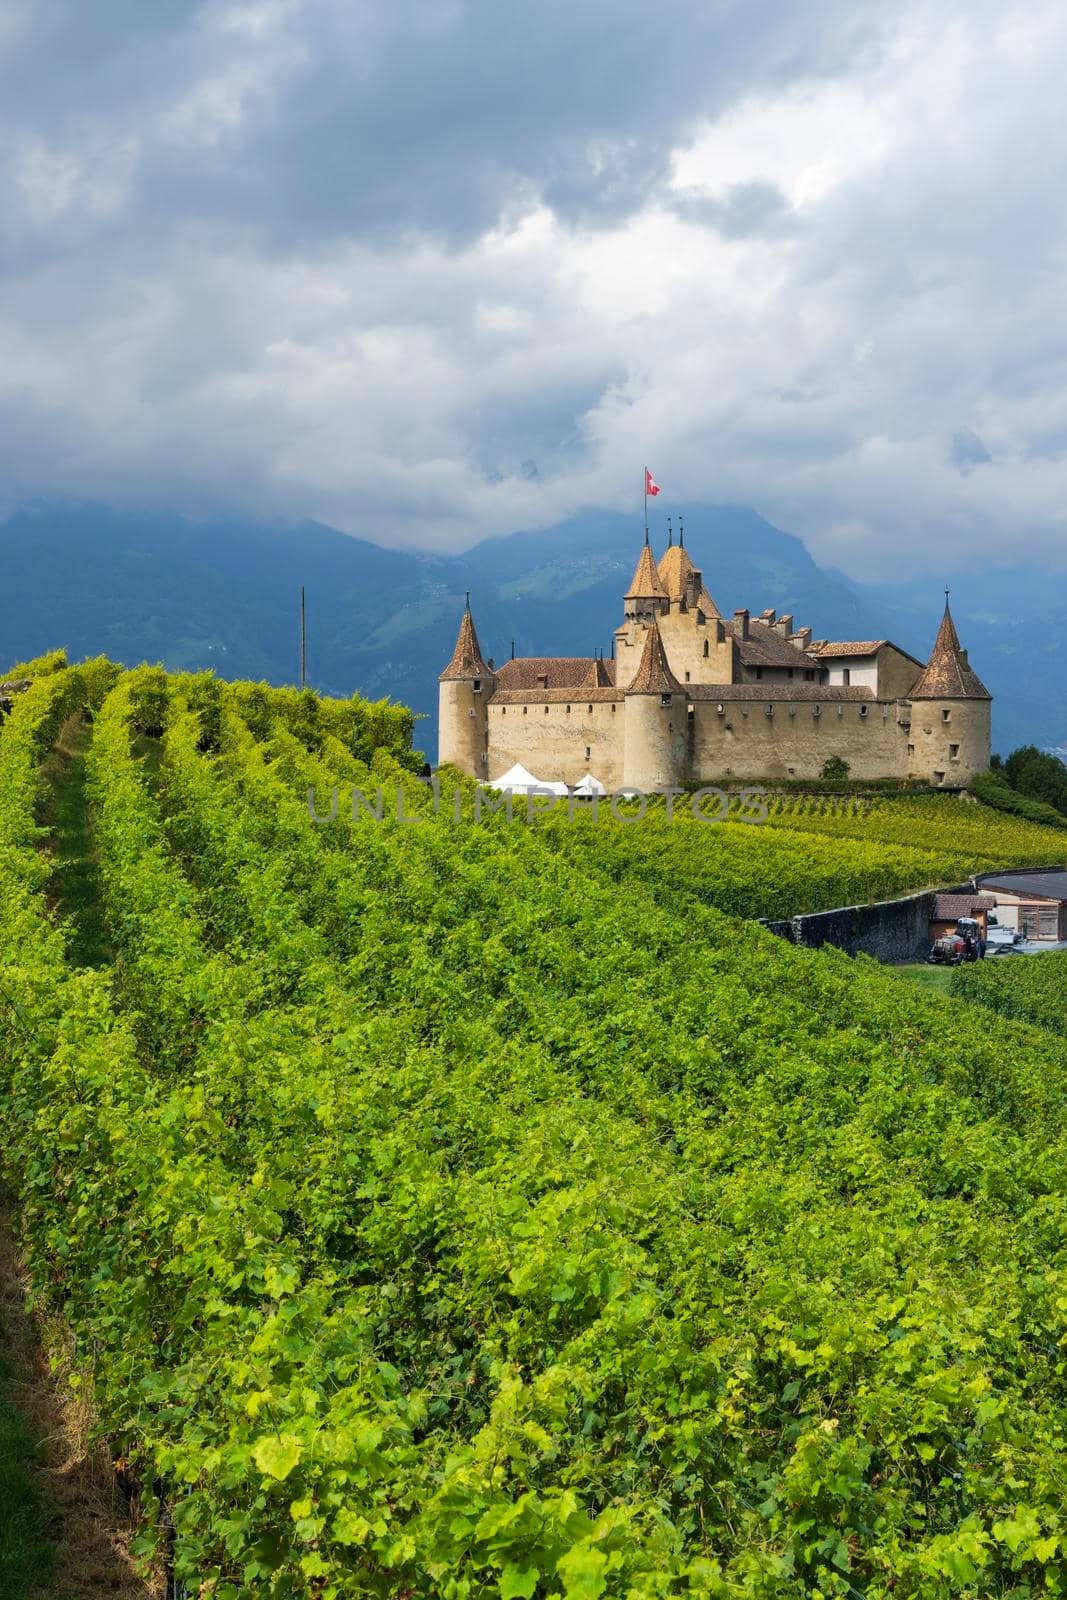 Castle Chateau d'Aigle in canton Vaud, Switzerland by phbcz